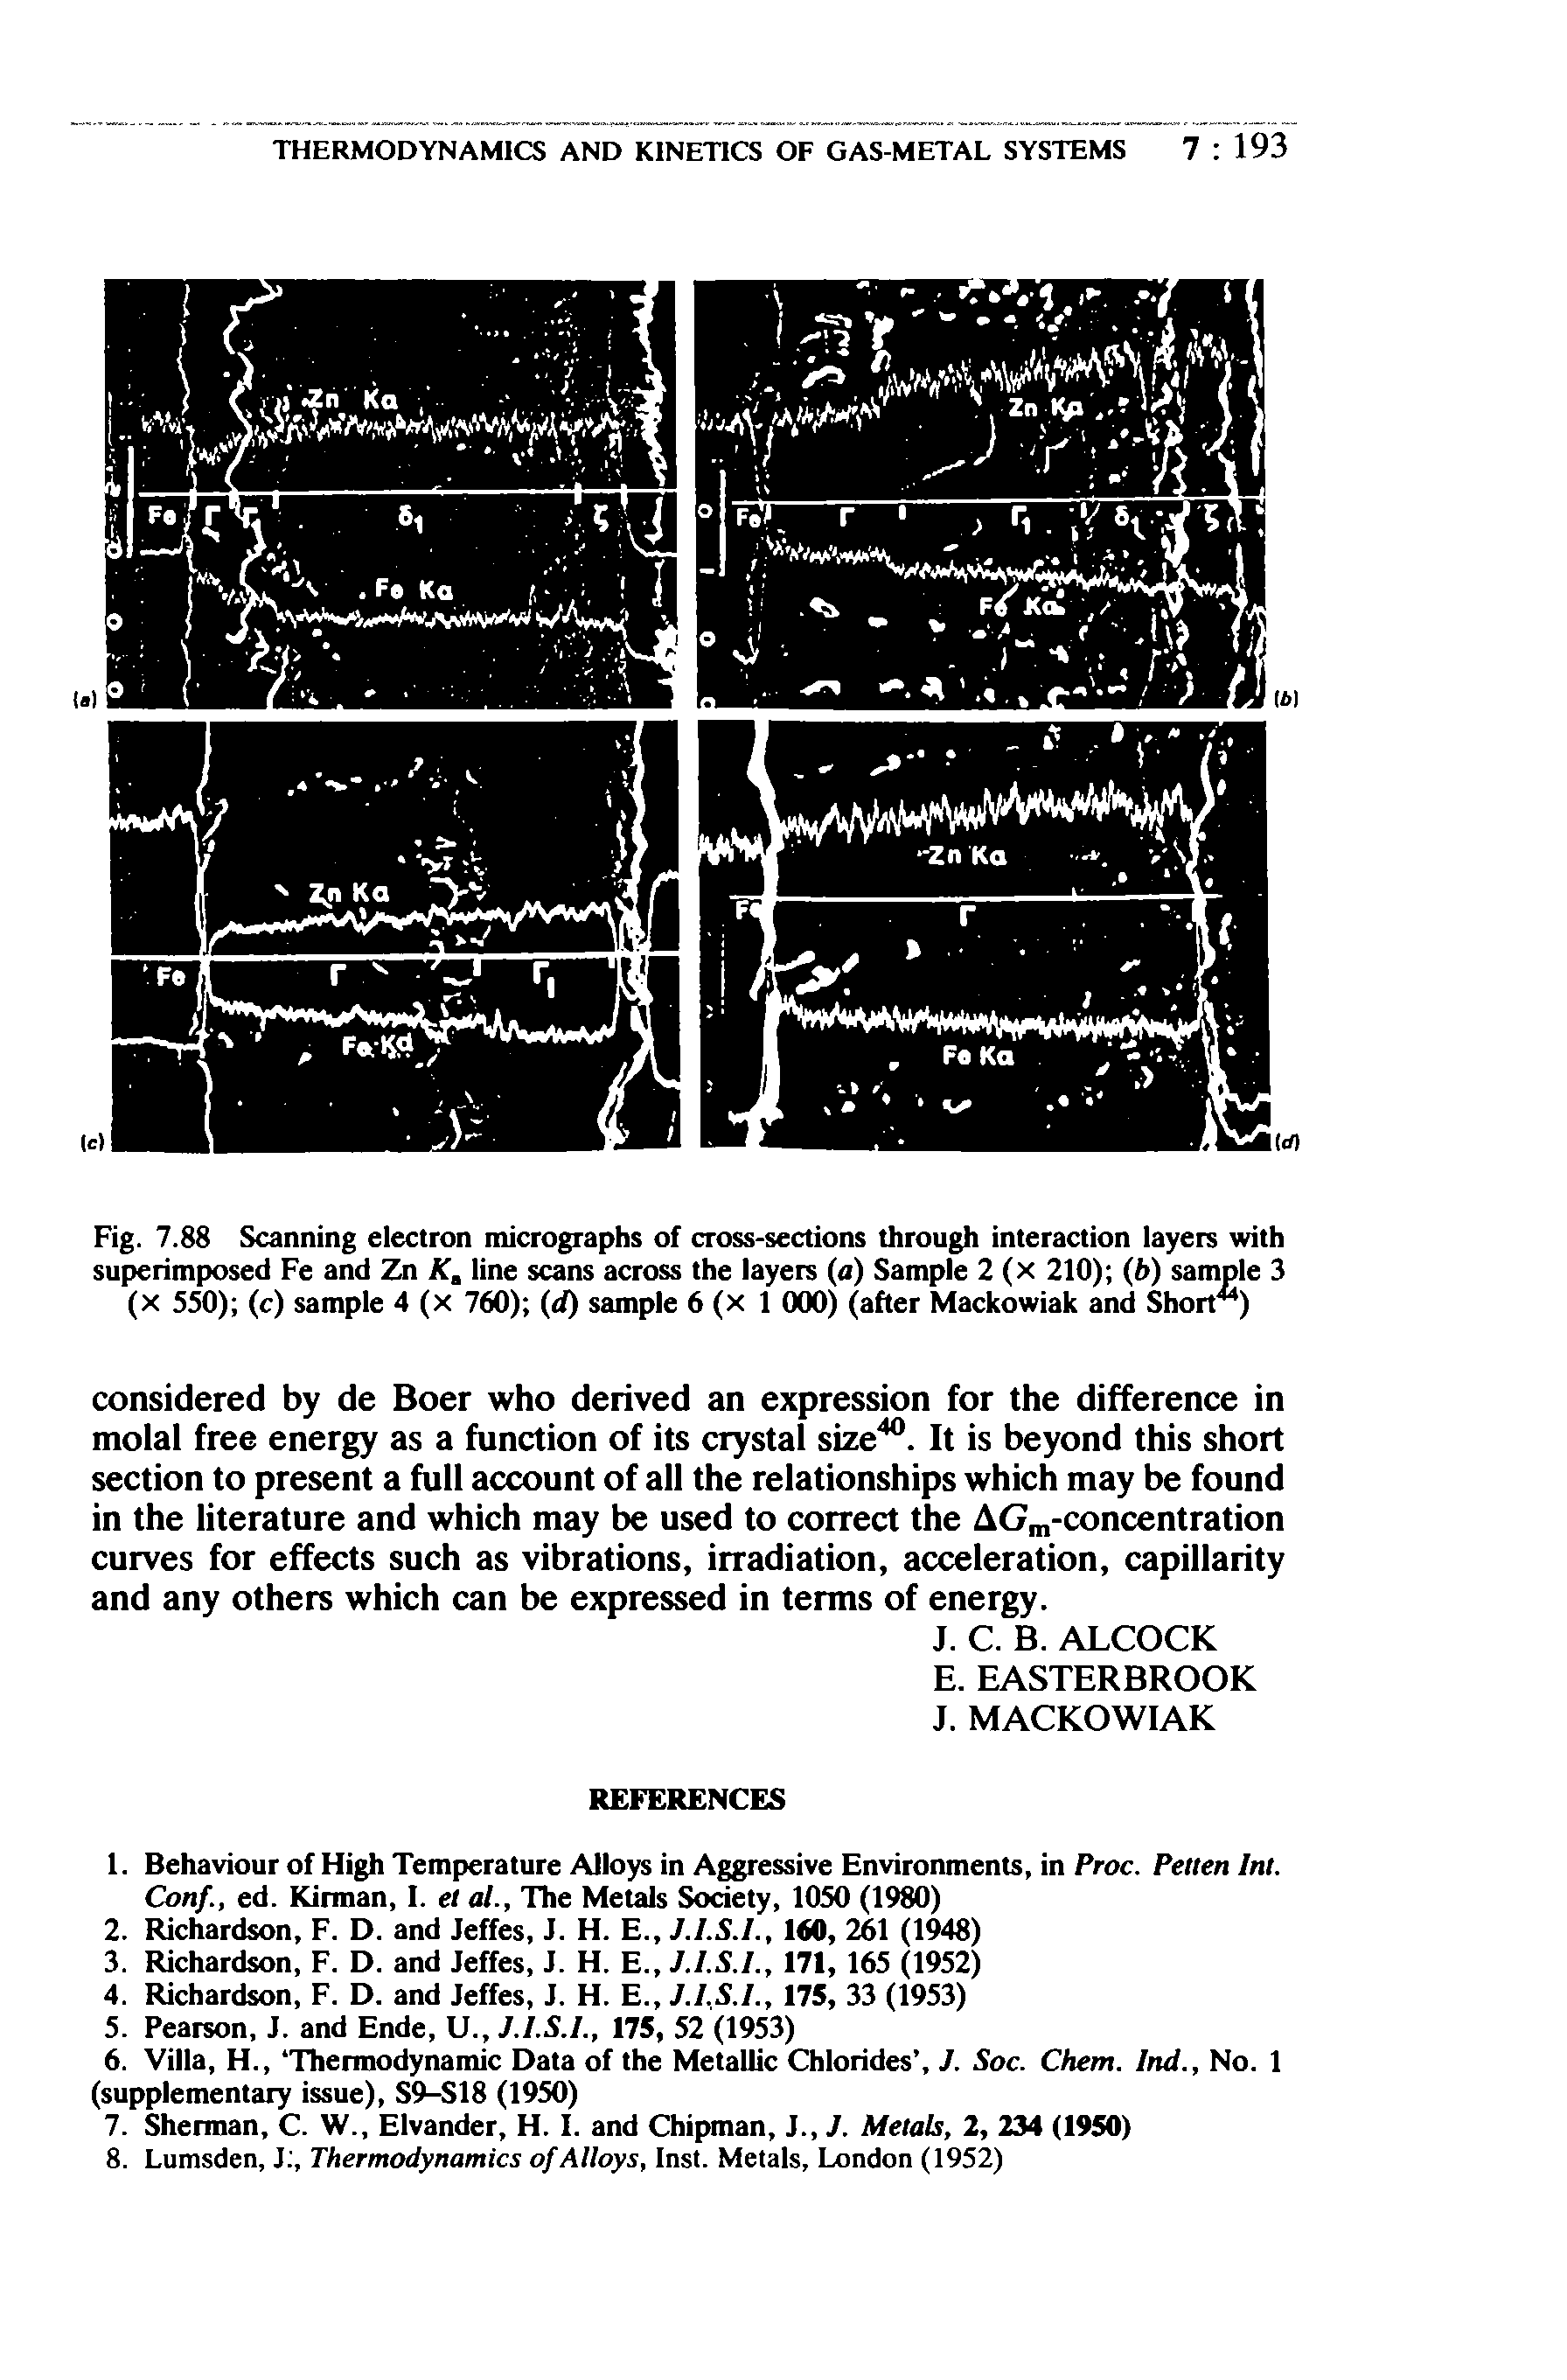 Fig. 7.88 Scanning electron micrographs of cross-sections through interaction layers with superimposed Fe and Zn K, line scans across the layers (<i) Sample 2 (x 210) (b) sample 3 (X 550) (c) sample 4 (x 760) (d) sample 6 (x 1 000) (after Mackowiak and Short )...